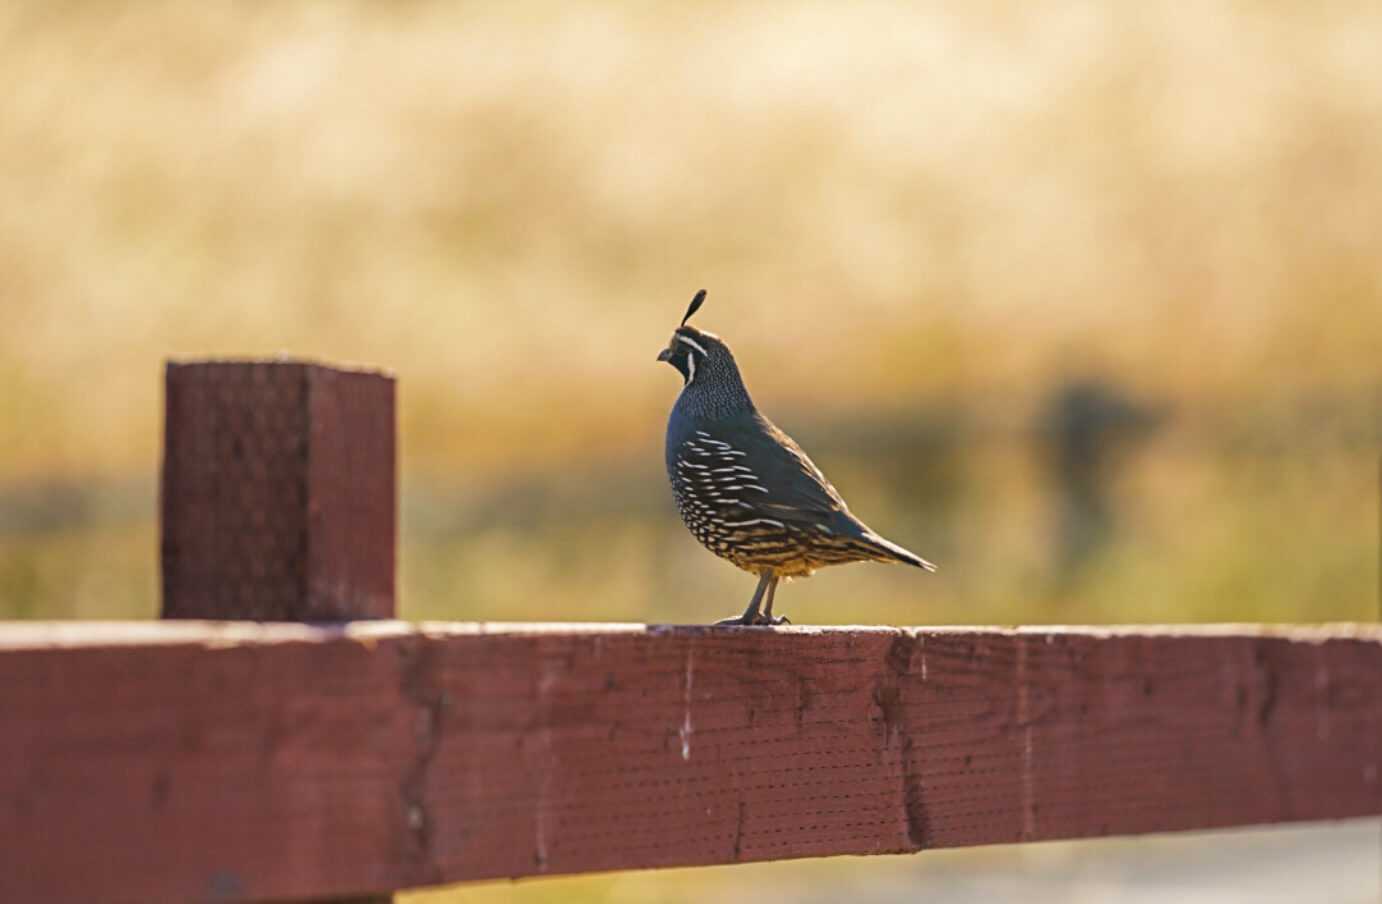 A photograph of a bird sitting on a fence